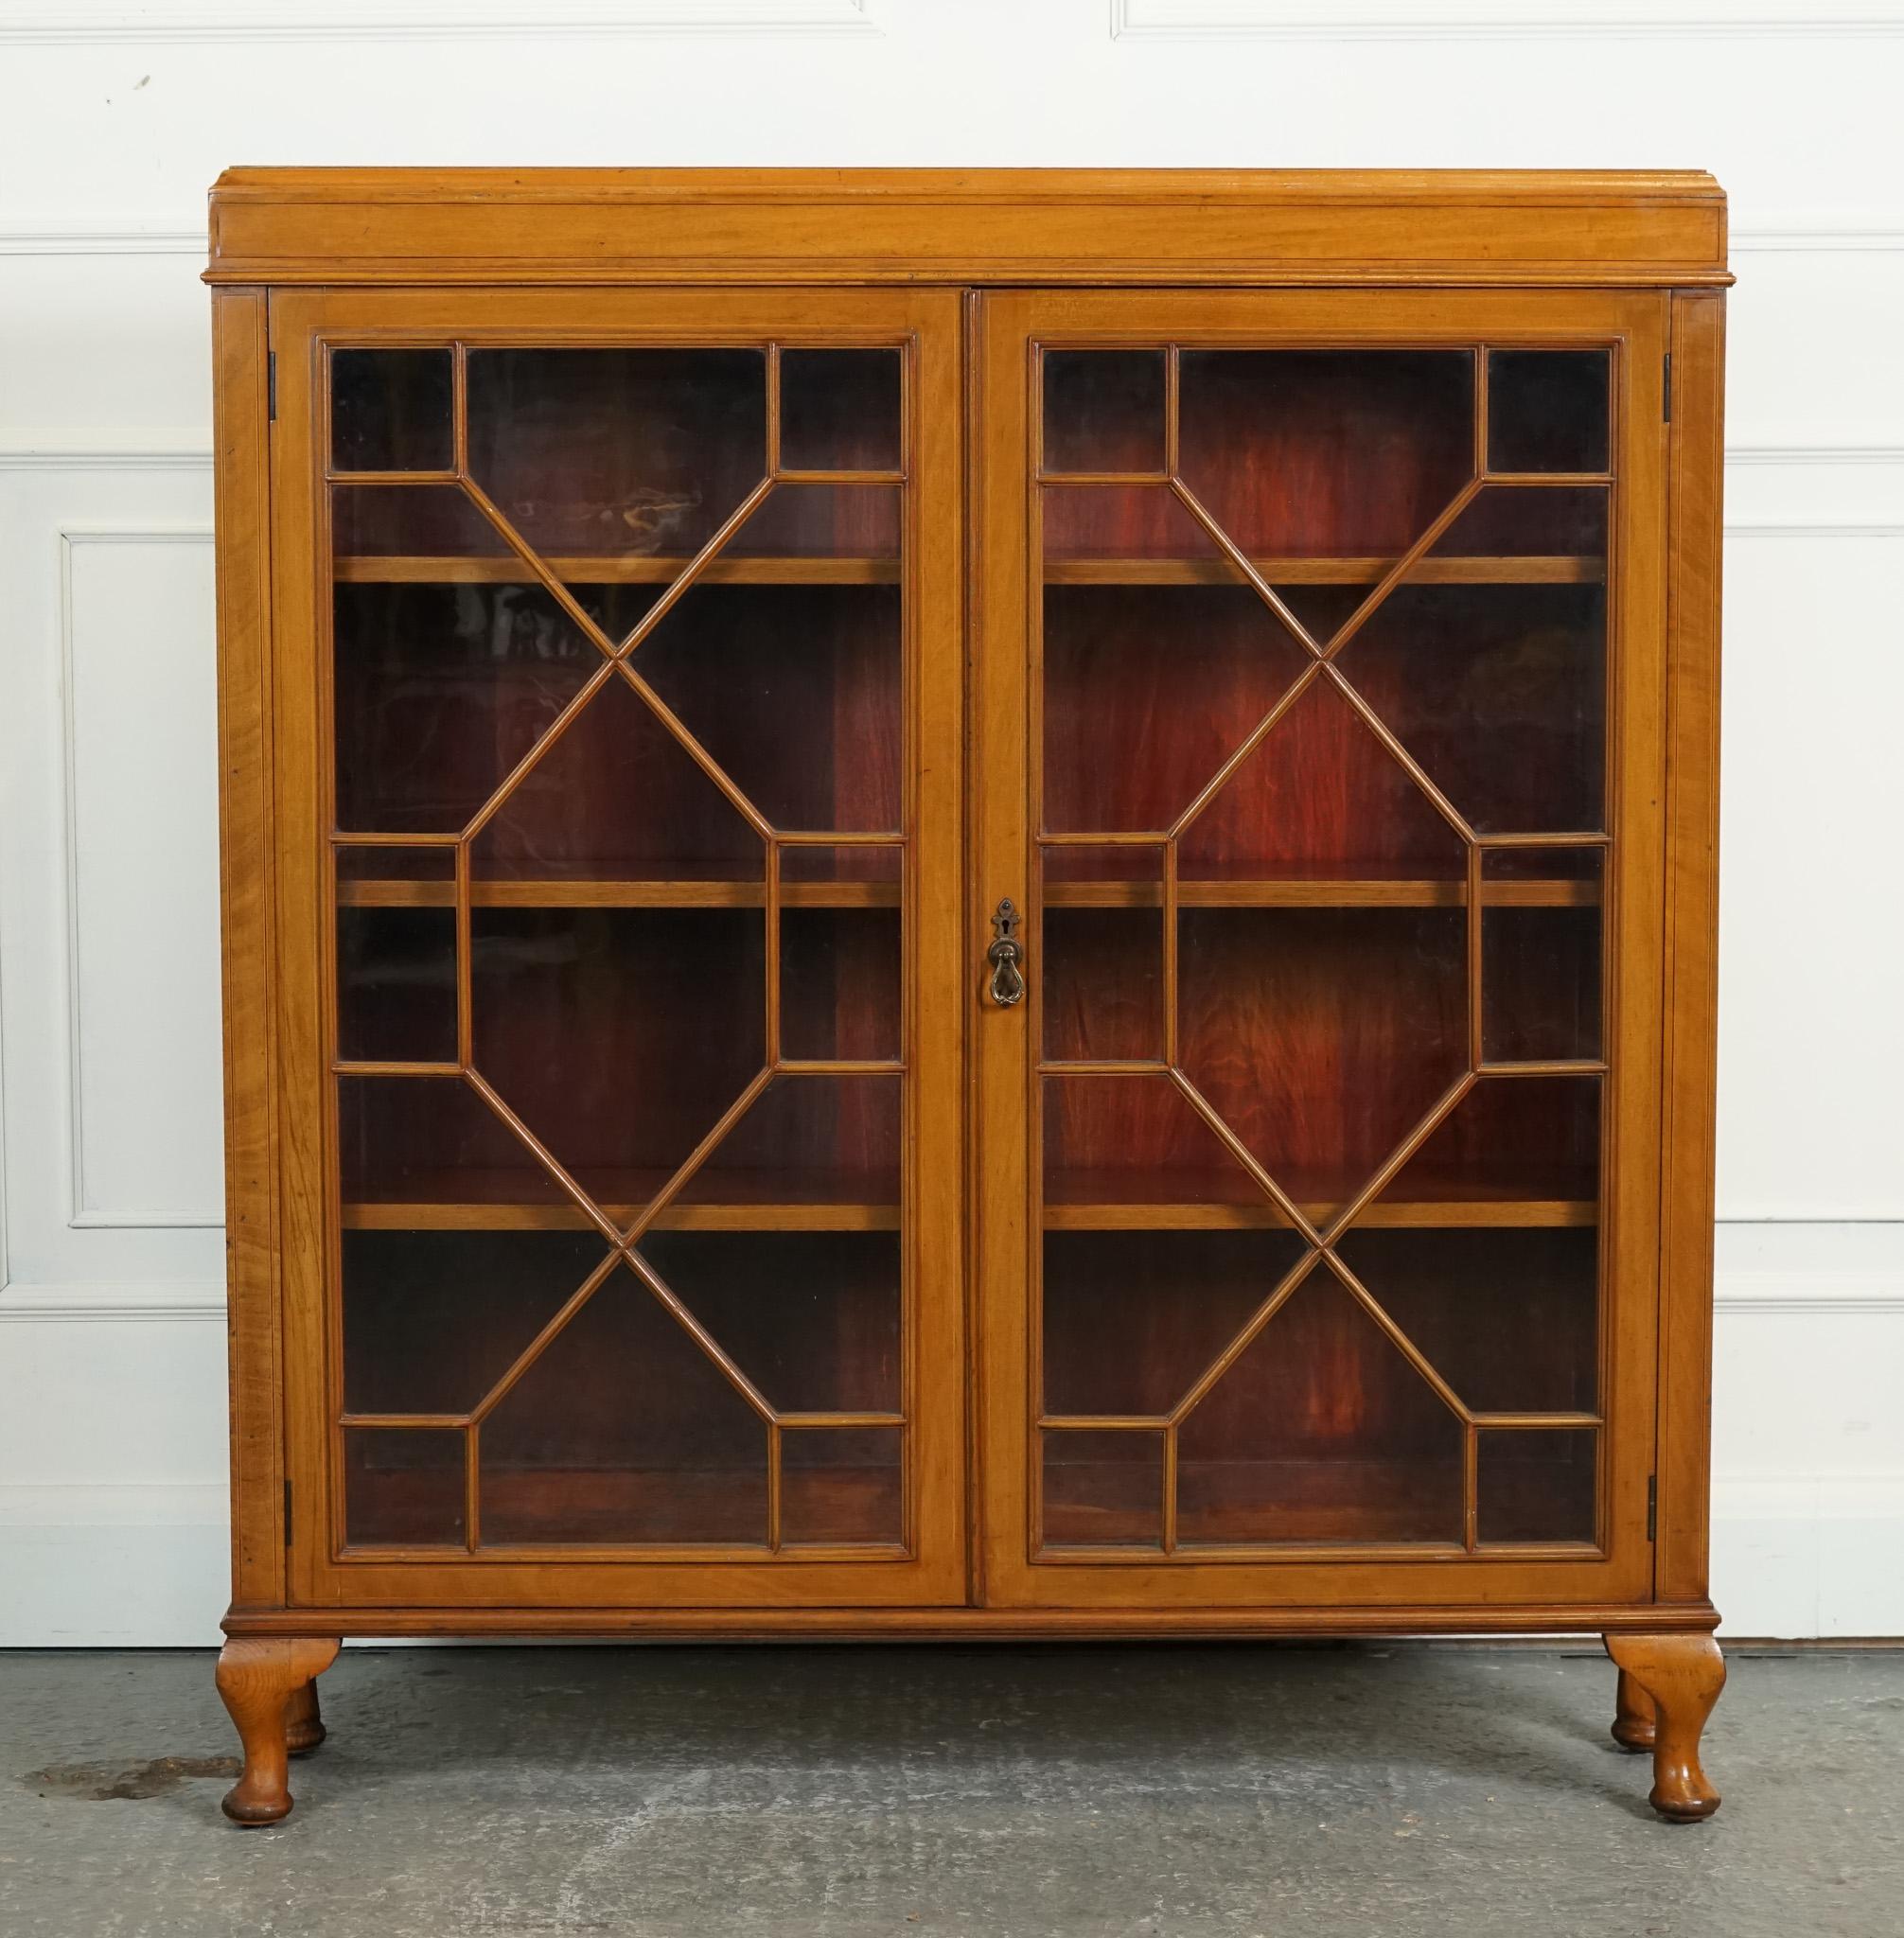 
We are delighted to offer for sale this Lovely Antique Victorian Astral Glazed Dwarf Bookcase.

 A stunning piece of furniture from the Victorian era. It features a compact size and is made of high-quality wood. The cabinet has a glass-fronted